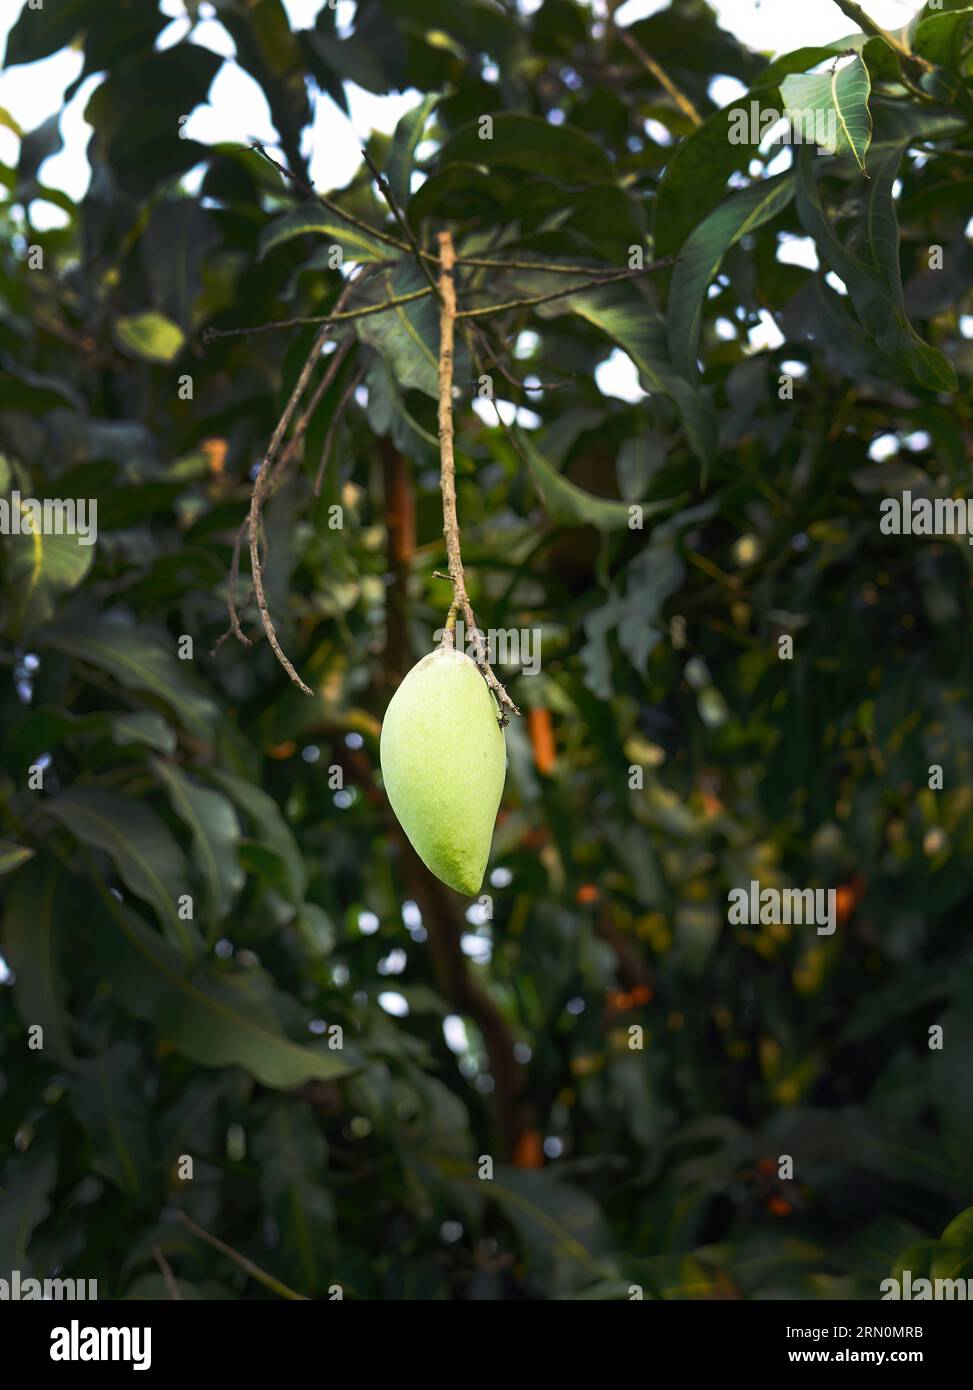 A single raw mango fruit hanging on a mango tree, young mango, sour or astringent taste, delicious, probiotic, healthy, vegan food, raw food, tropical Stock Photo